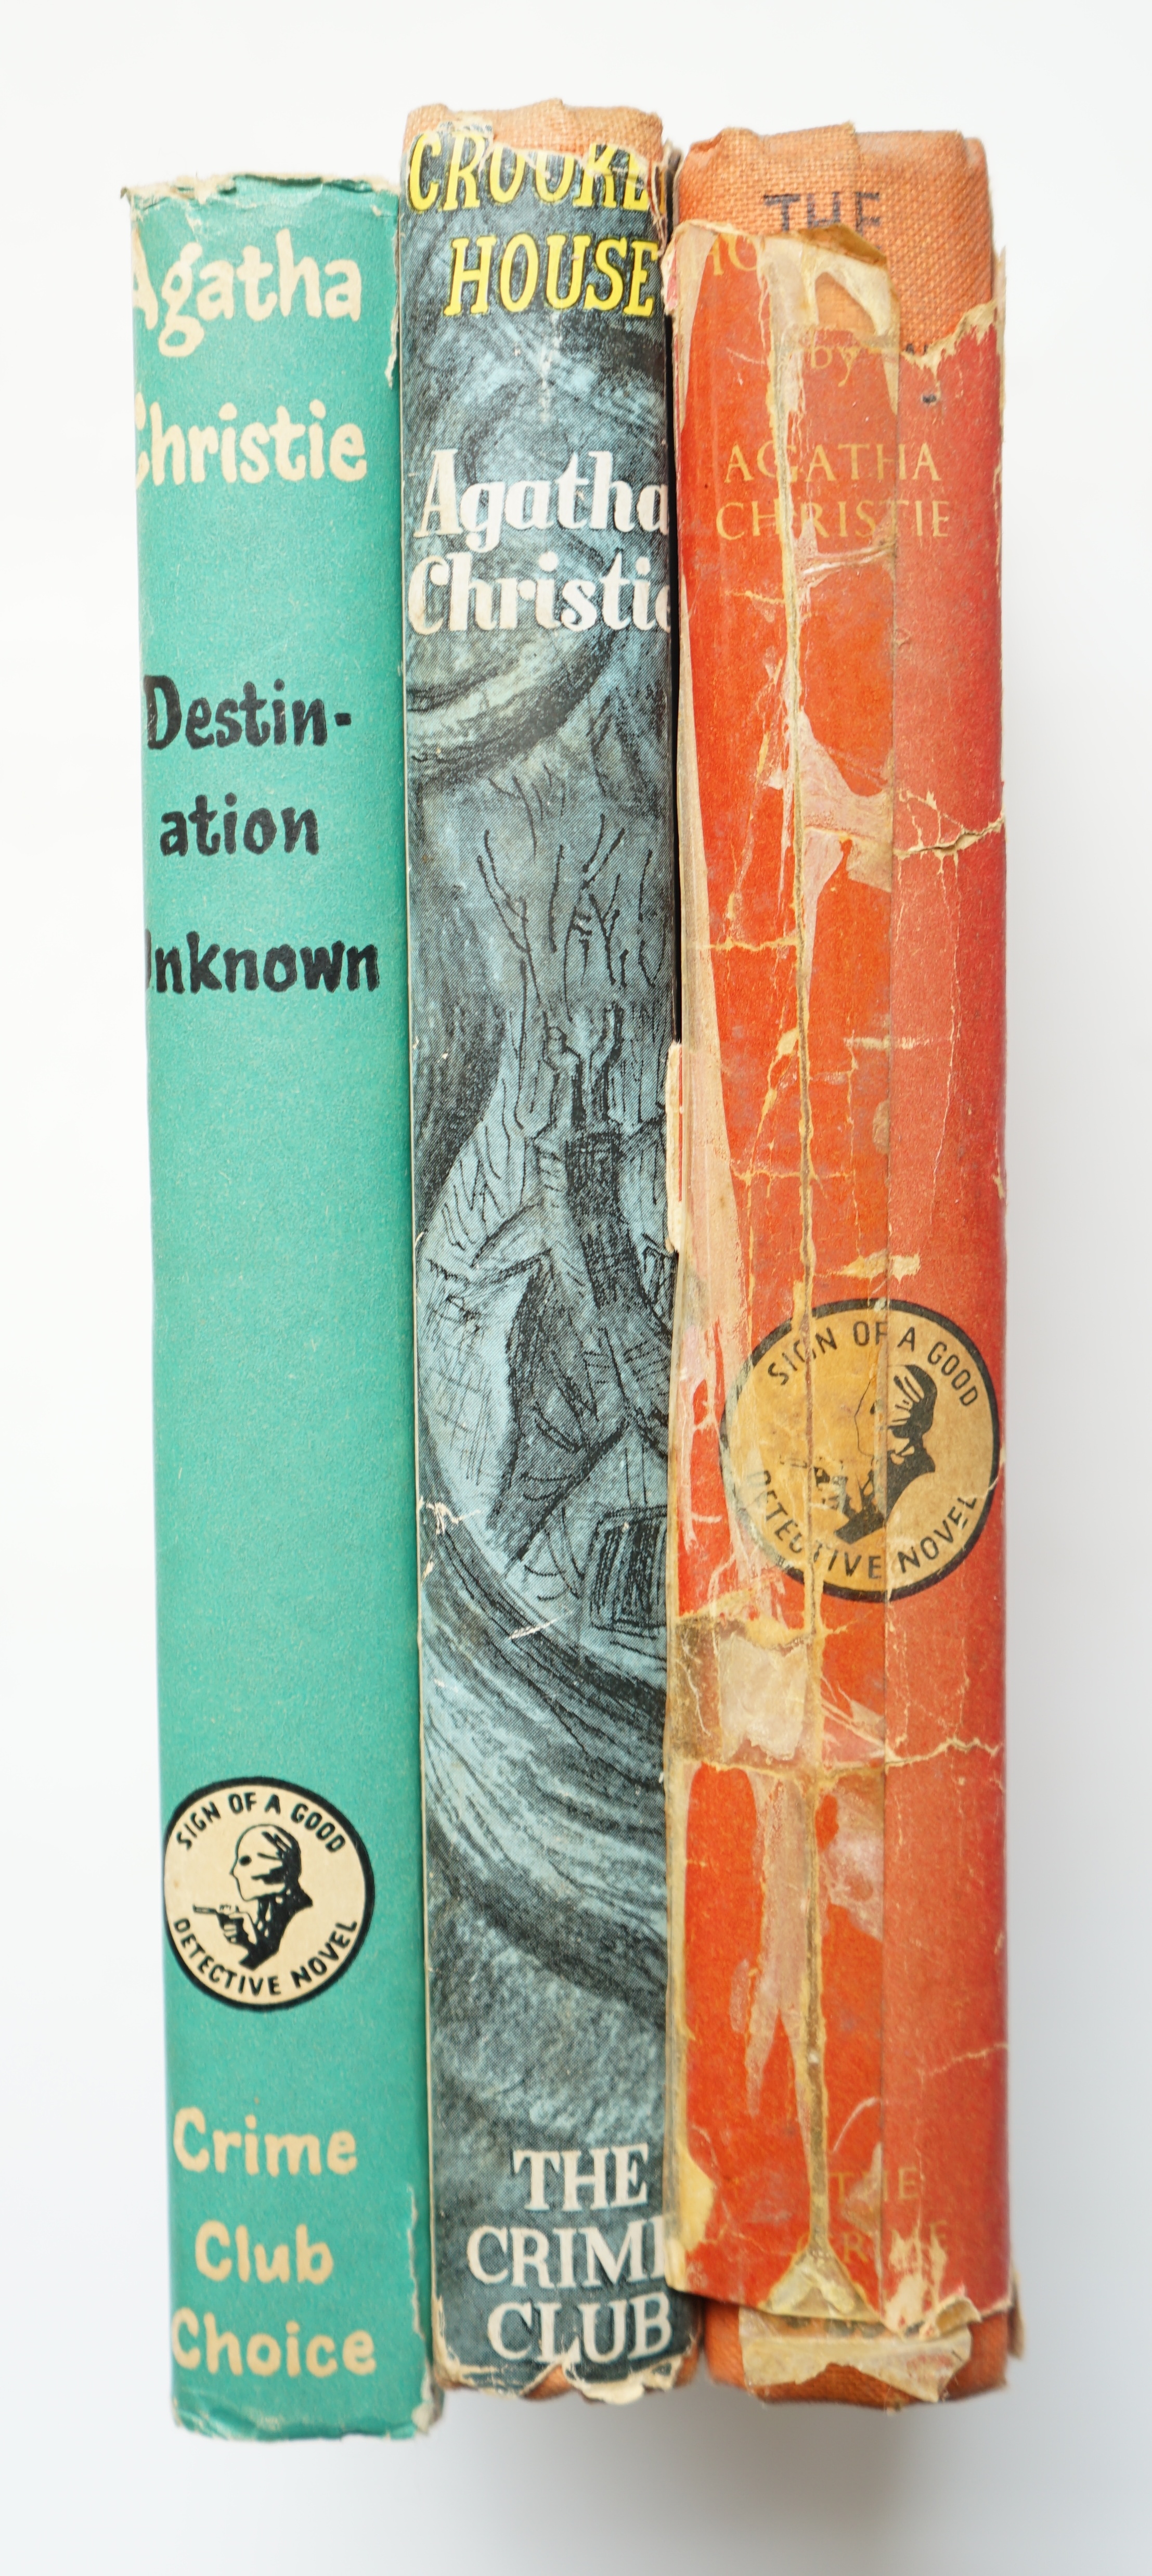 Christie, Agatha - 3 works - The Hollow, 1st edition, in torn d/j, 1946; Crooked House, 1st edition, in d/j, 1949 and Destination Unknown, 1st edition, with d/j, 1954, all published for The Crime Club, by Collins, St Jam